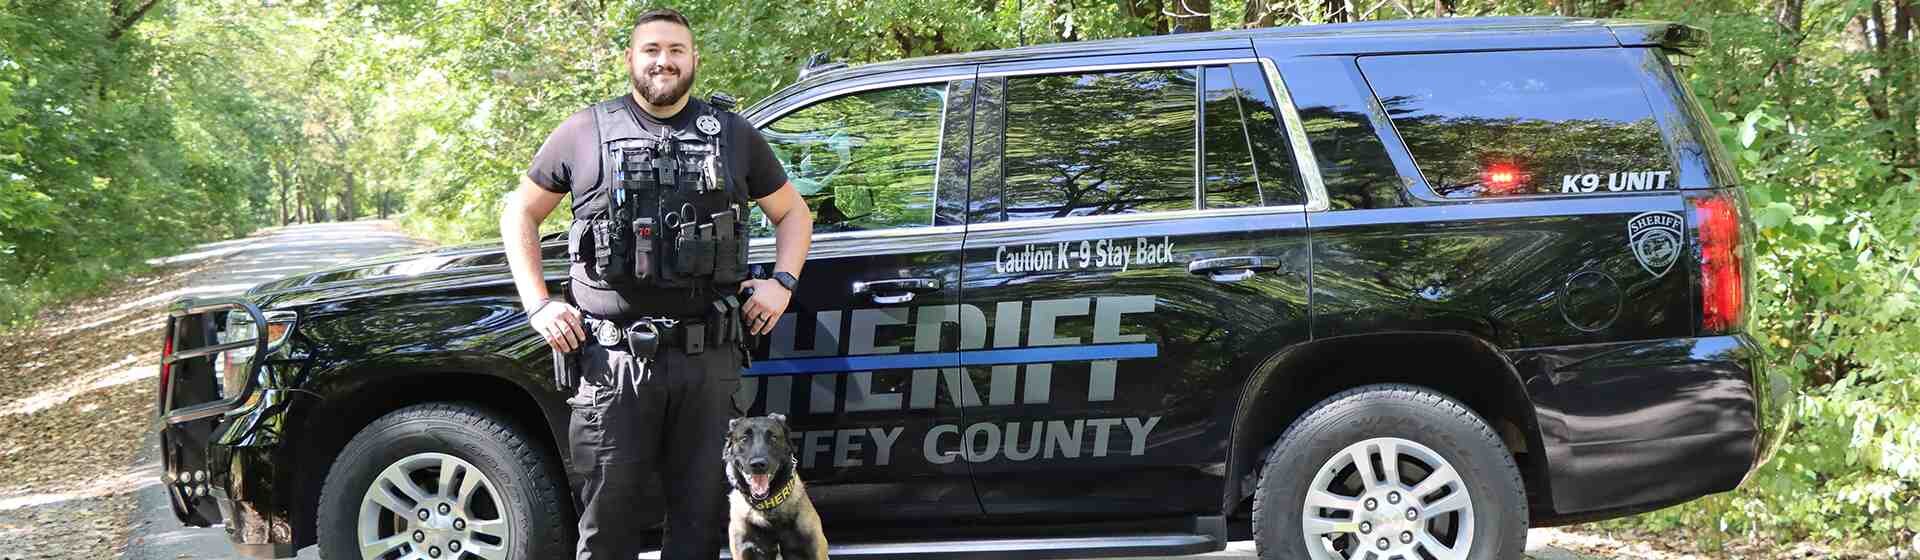 K-9 owner and his black dog stand beside their sheriff vehicle.